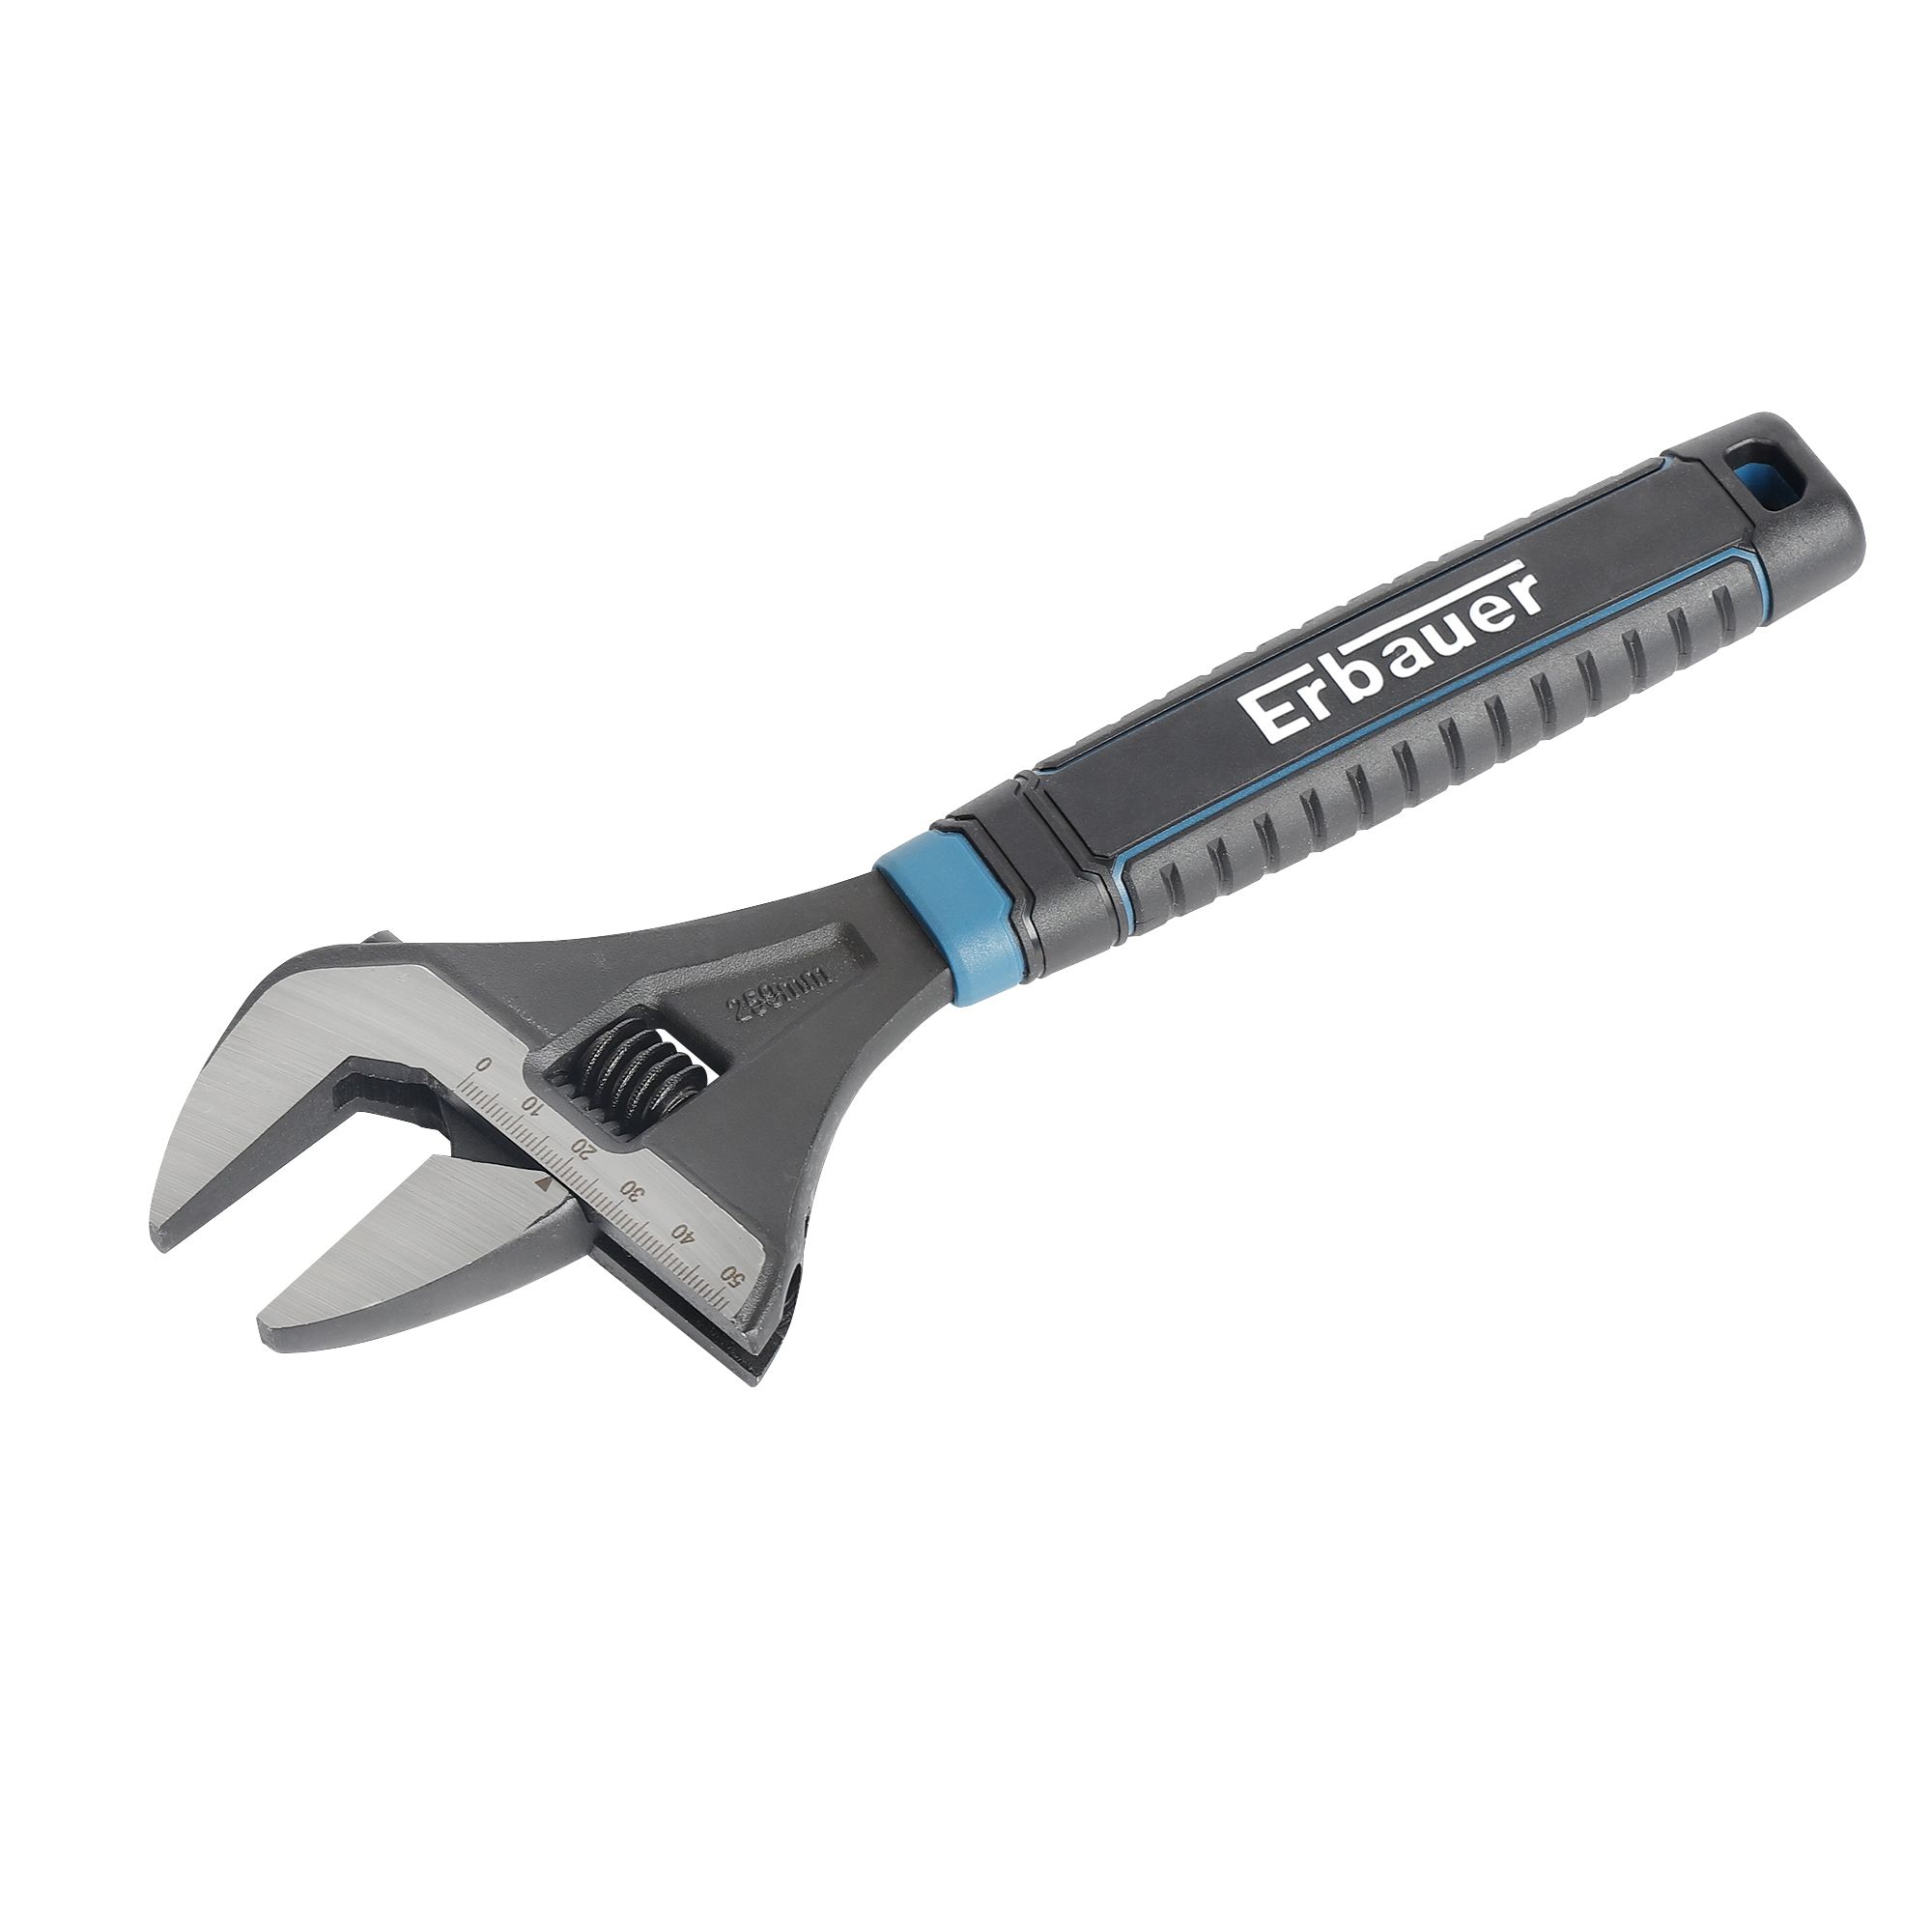 Erbauer 257mm Adjustable wrench